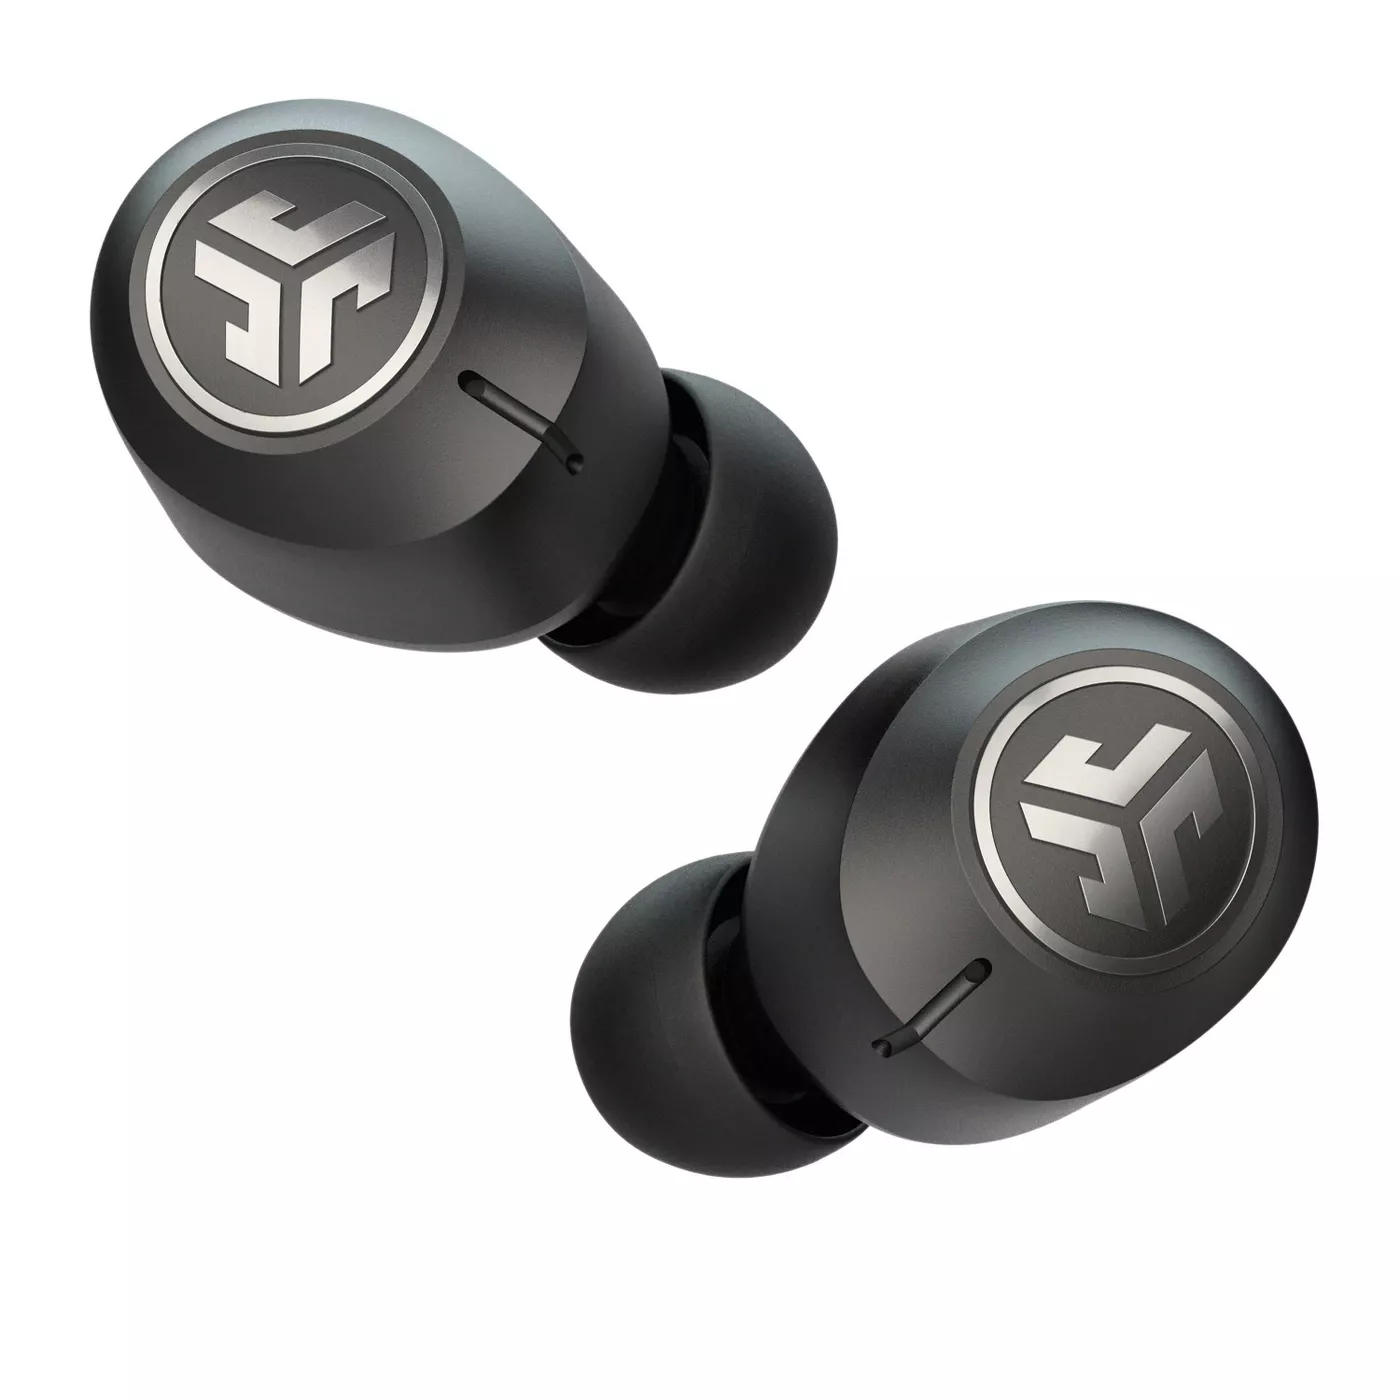 JLab JBuds Air Active Noise Cancelling True Wireless Earbuds - Black - image 1 of 8